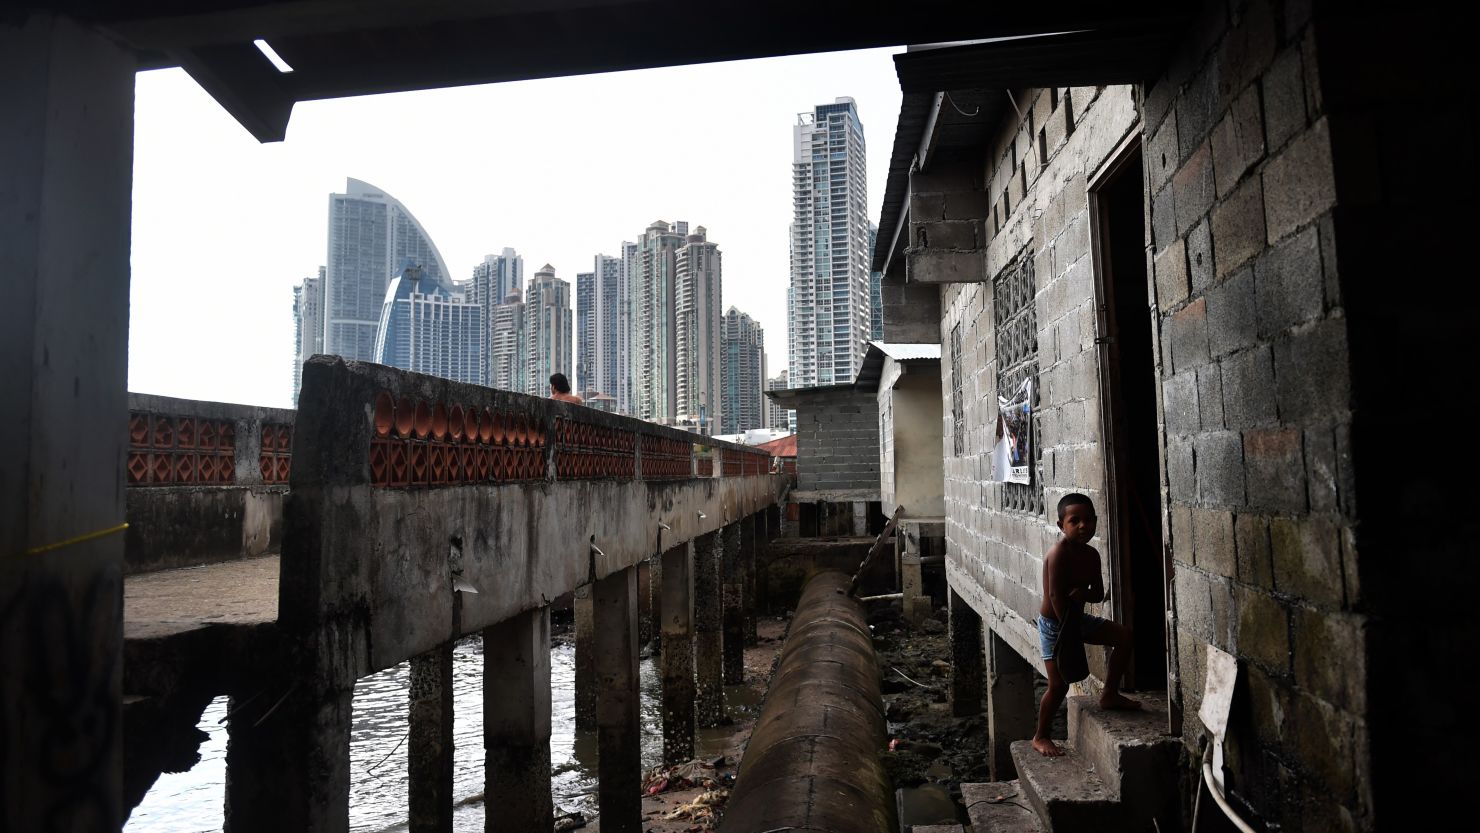 A boy walks into his house in Panama City's Boca La Caja neighborhood -- overlooked by new high-rise towers.